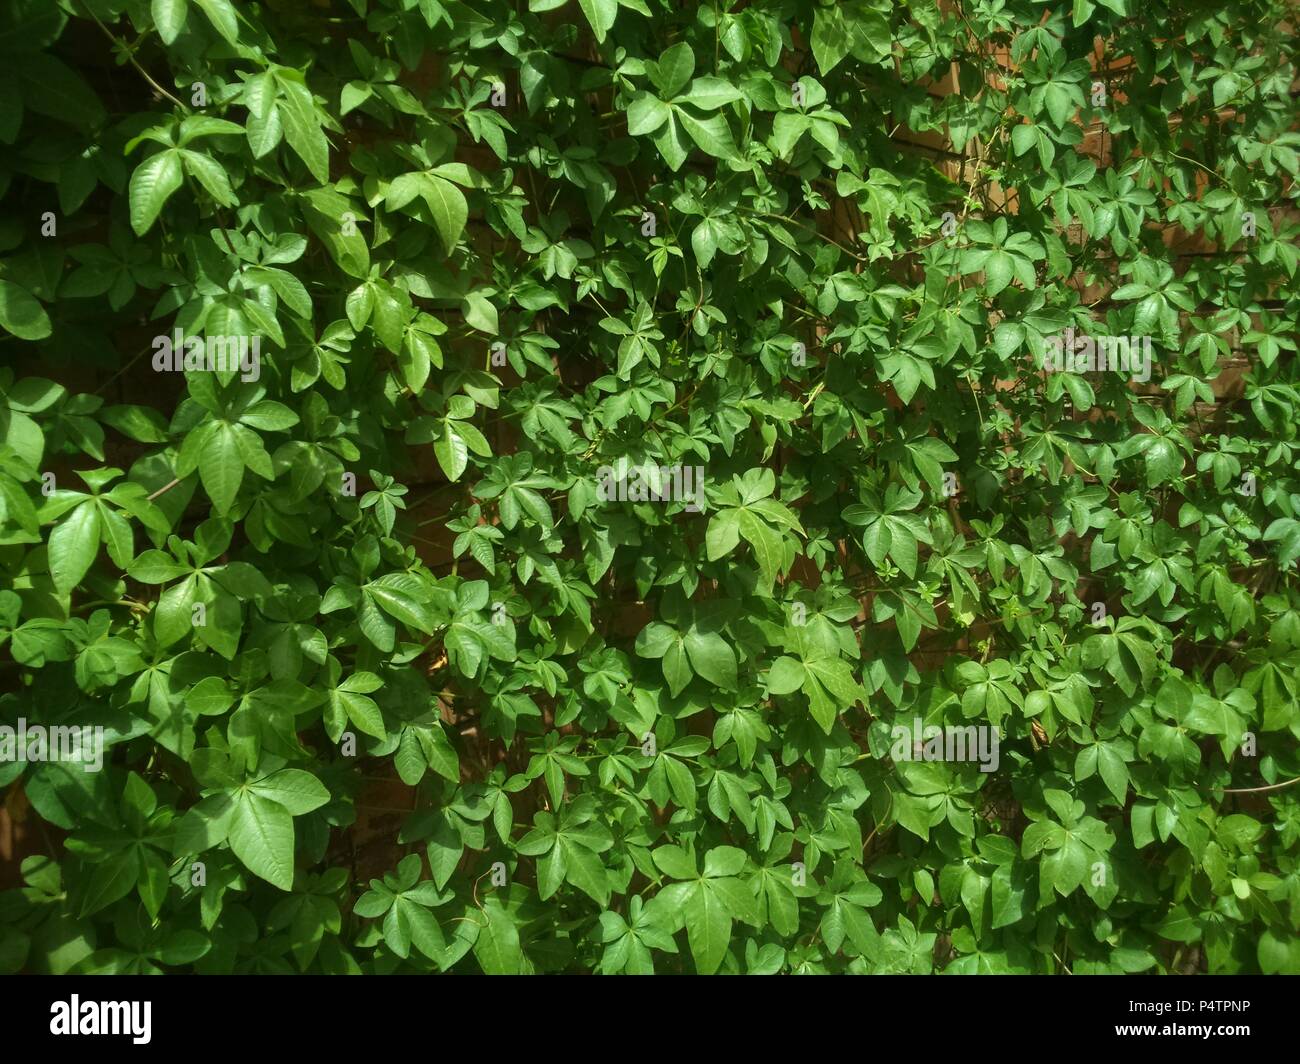 Morning Glory Plant on the background creates a beautiful green theme Stock Photo